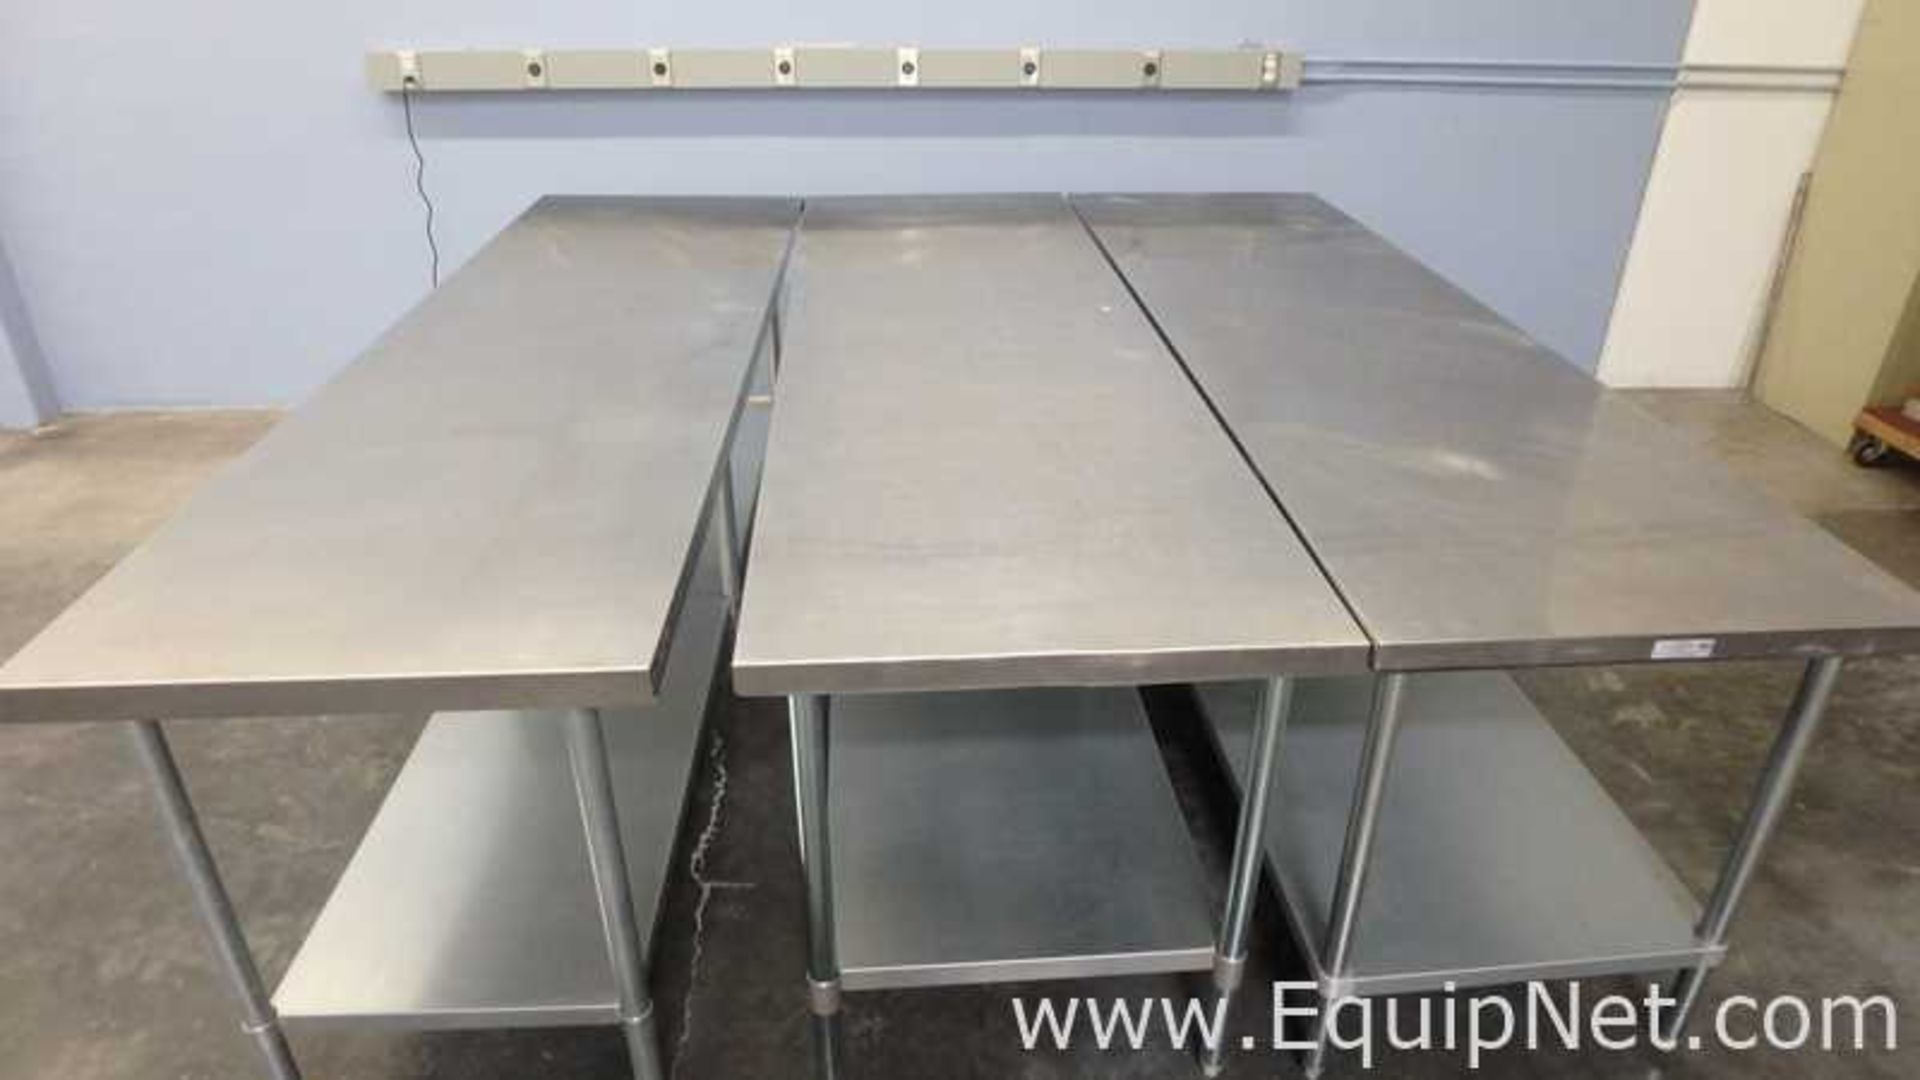 Lot of 3 GSW WT-EE3096 Economy Stainless Steel Work Table 96in x 30in - Image 8 of 9